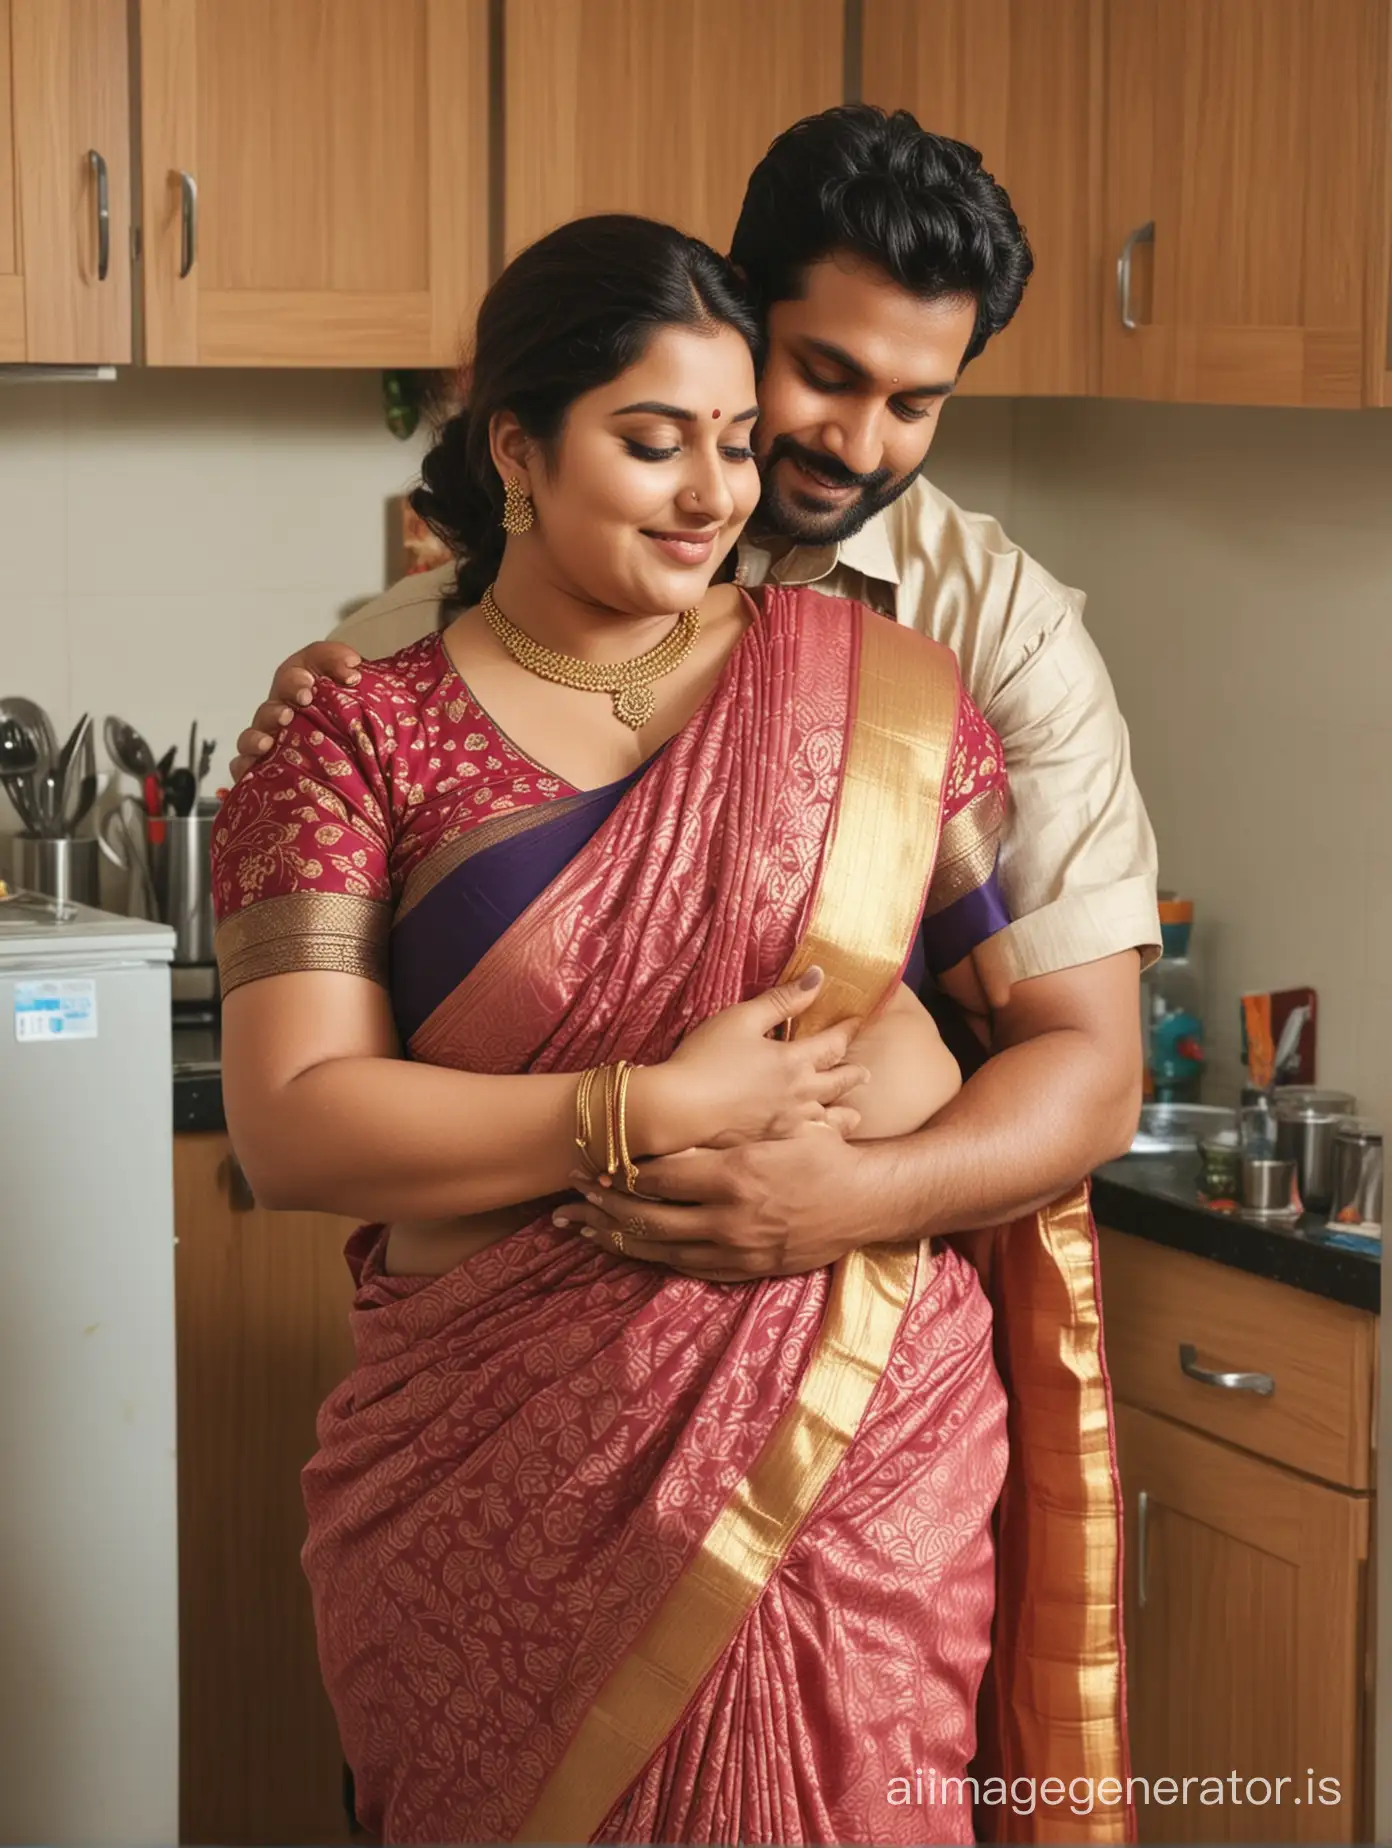 Affectionate-Husband-Embraces-Plus-Size-Wife-in-Traditional-Saree-in-Kitchen-Setting